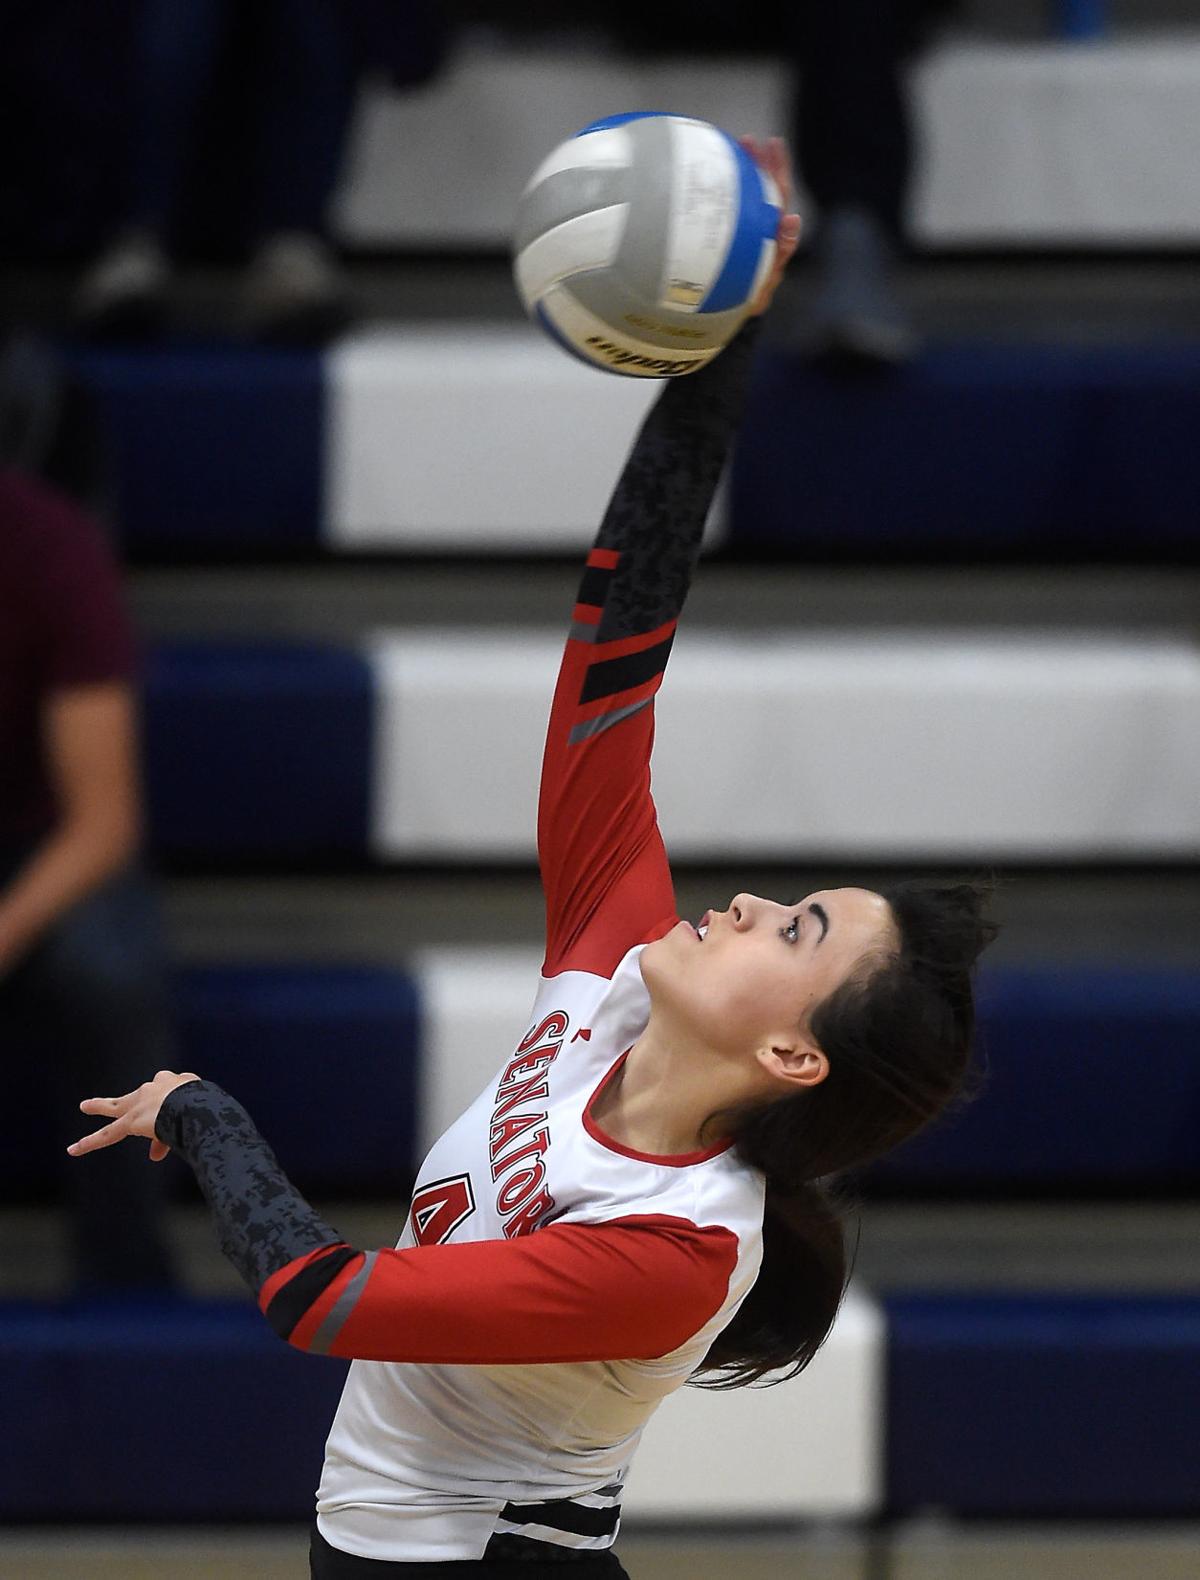 Fun, competitiveness come together at District 4 allstar volleyball